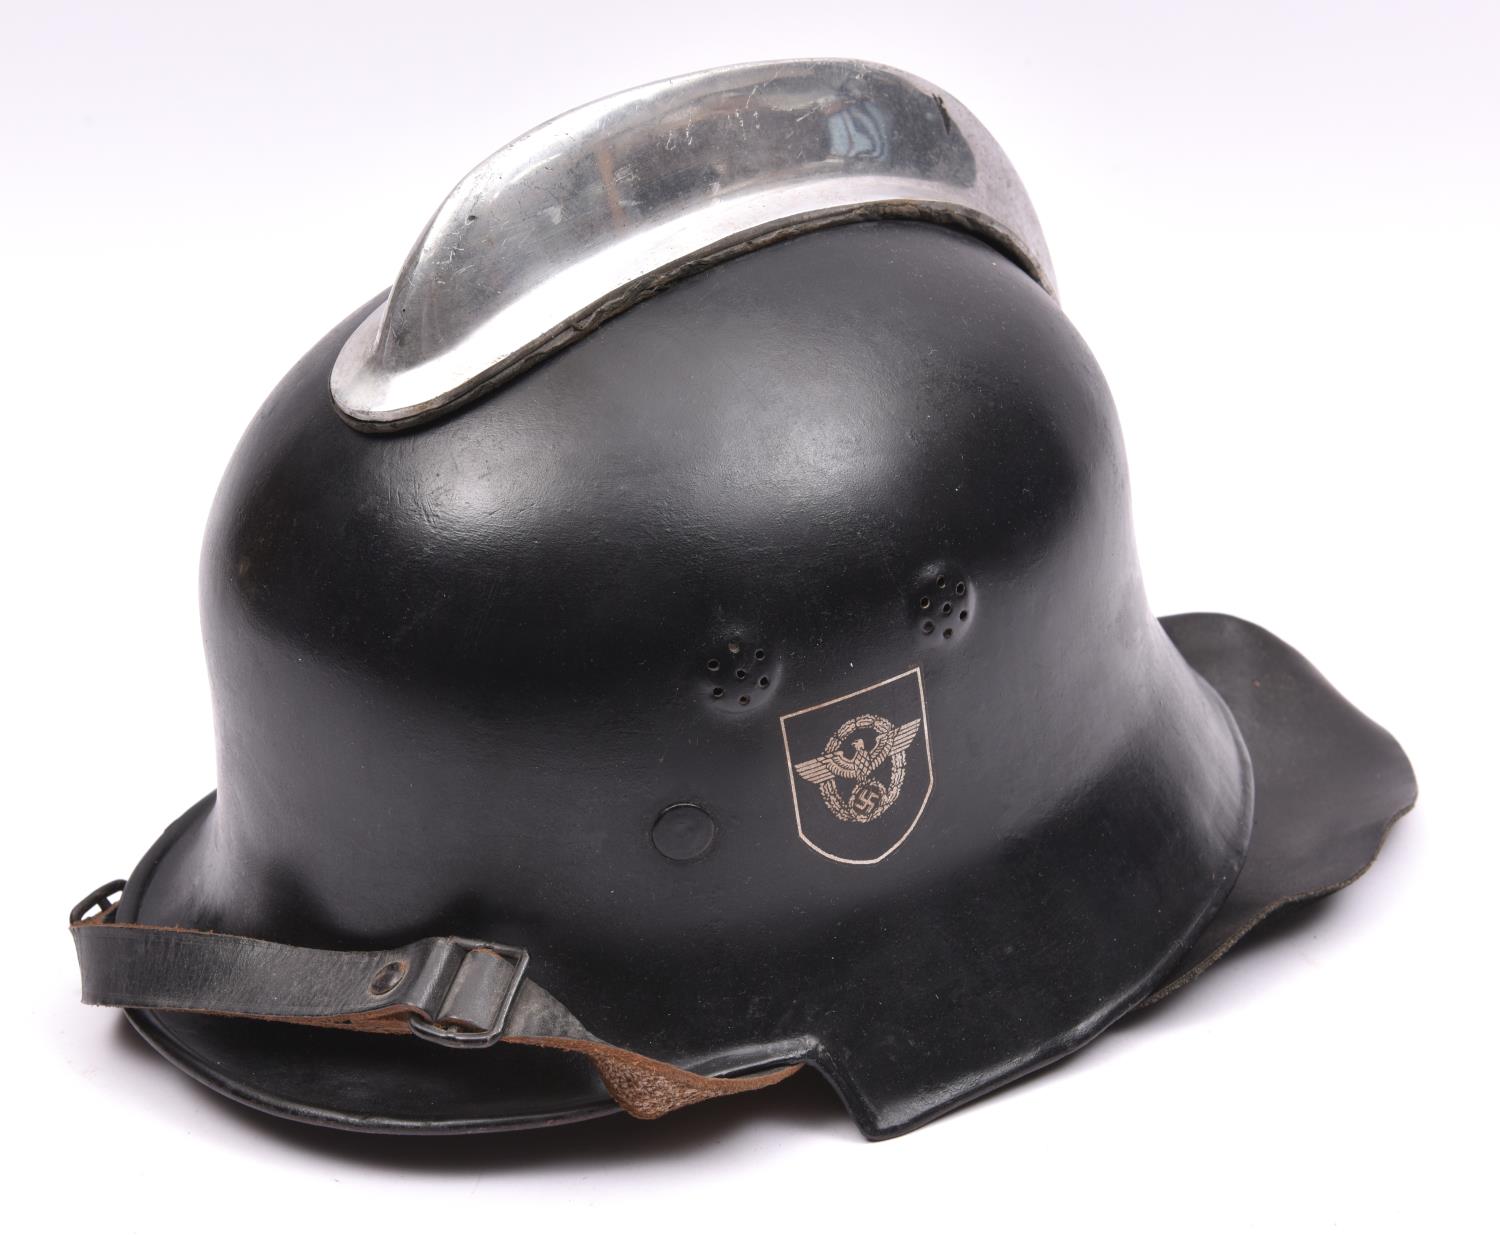 A Third Reich Fireman's steel helmet, blackened skull with decals, plated crest, leather lining